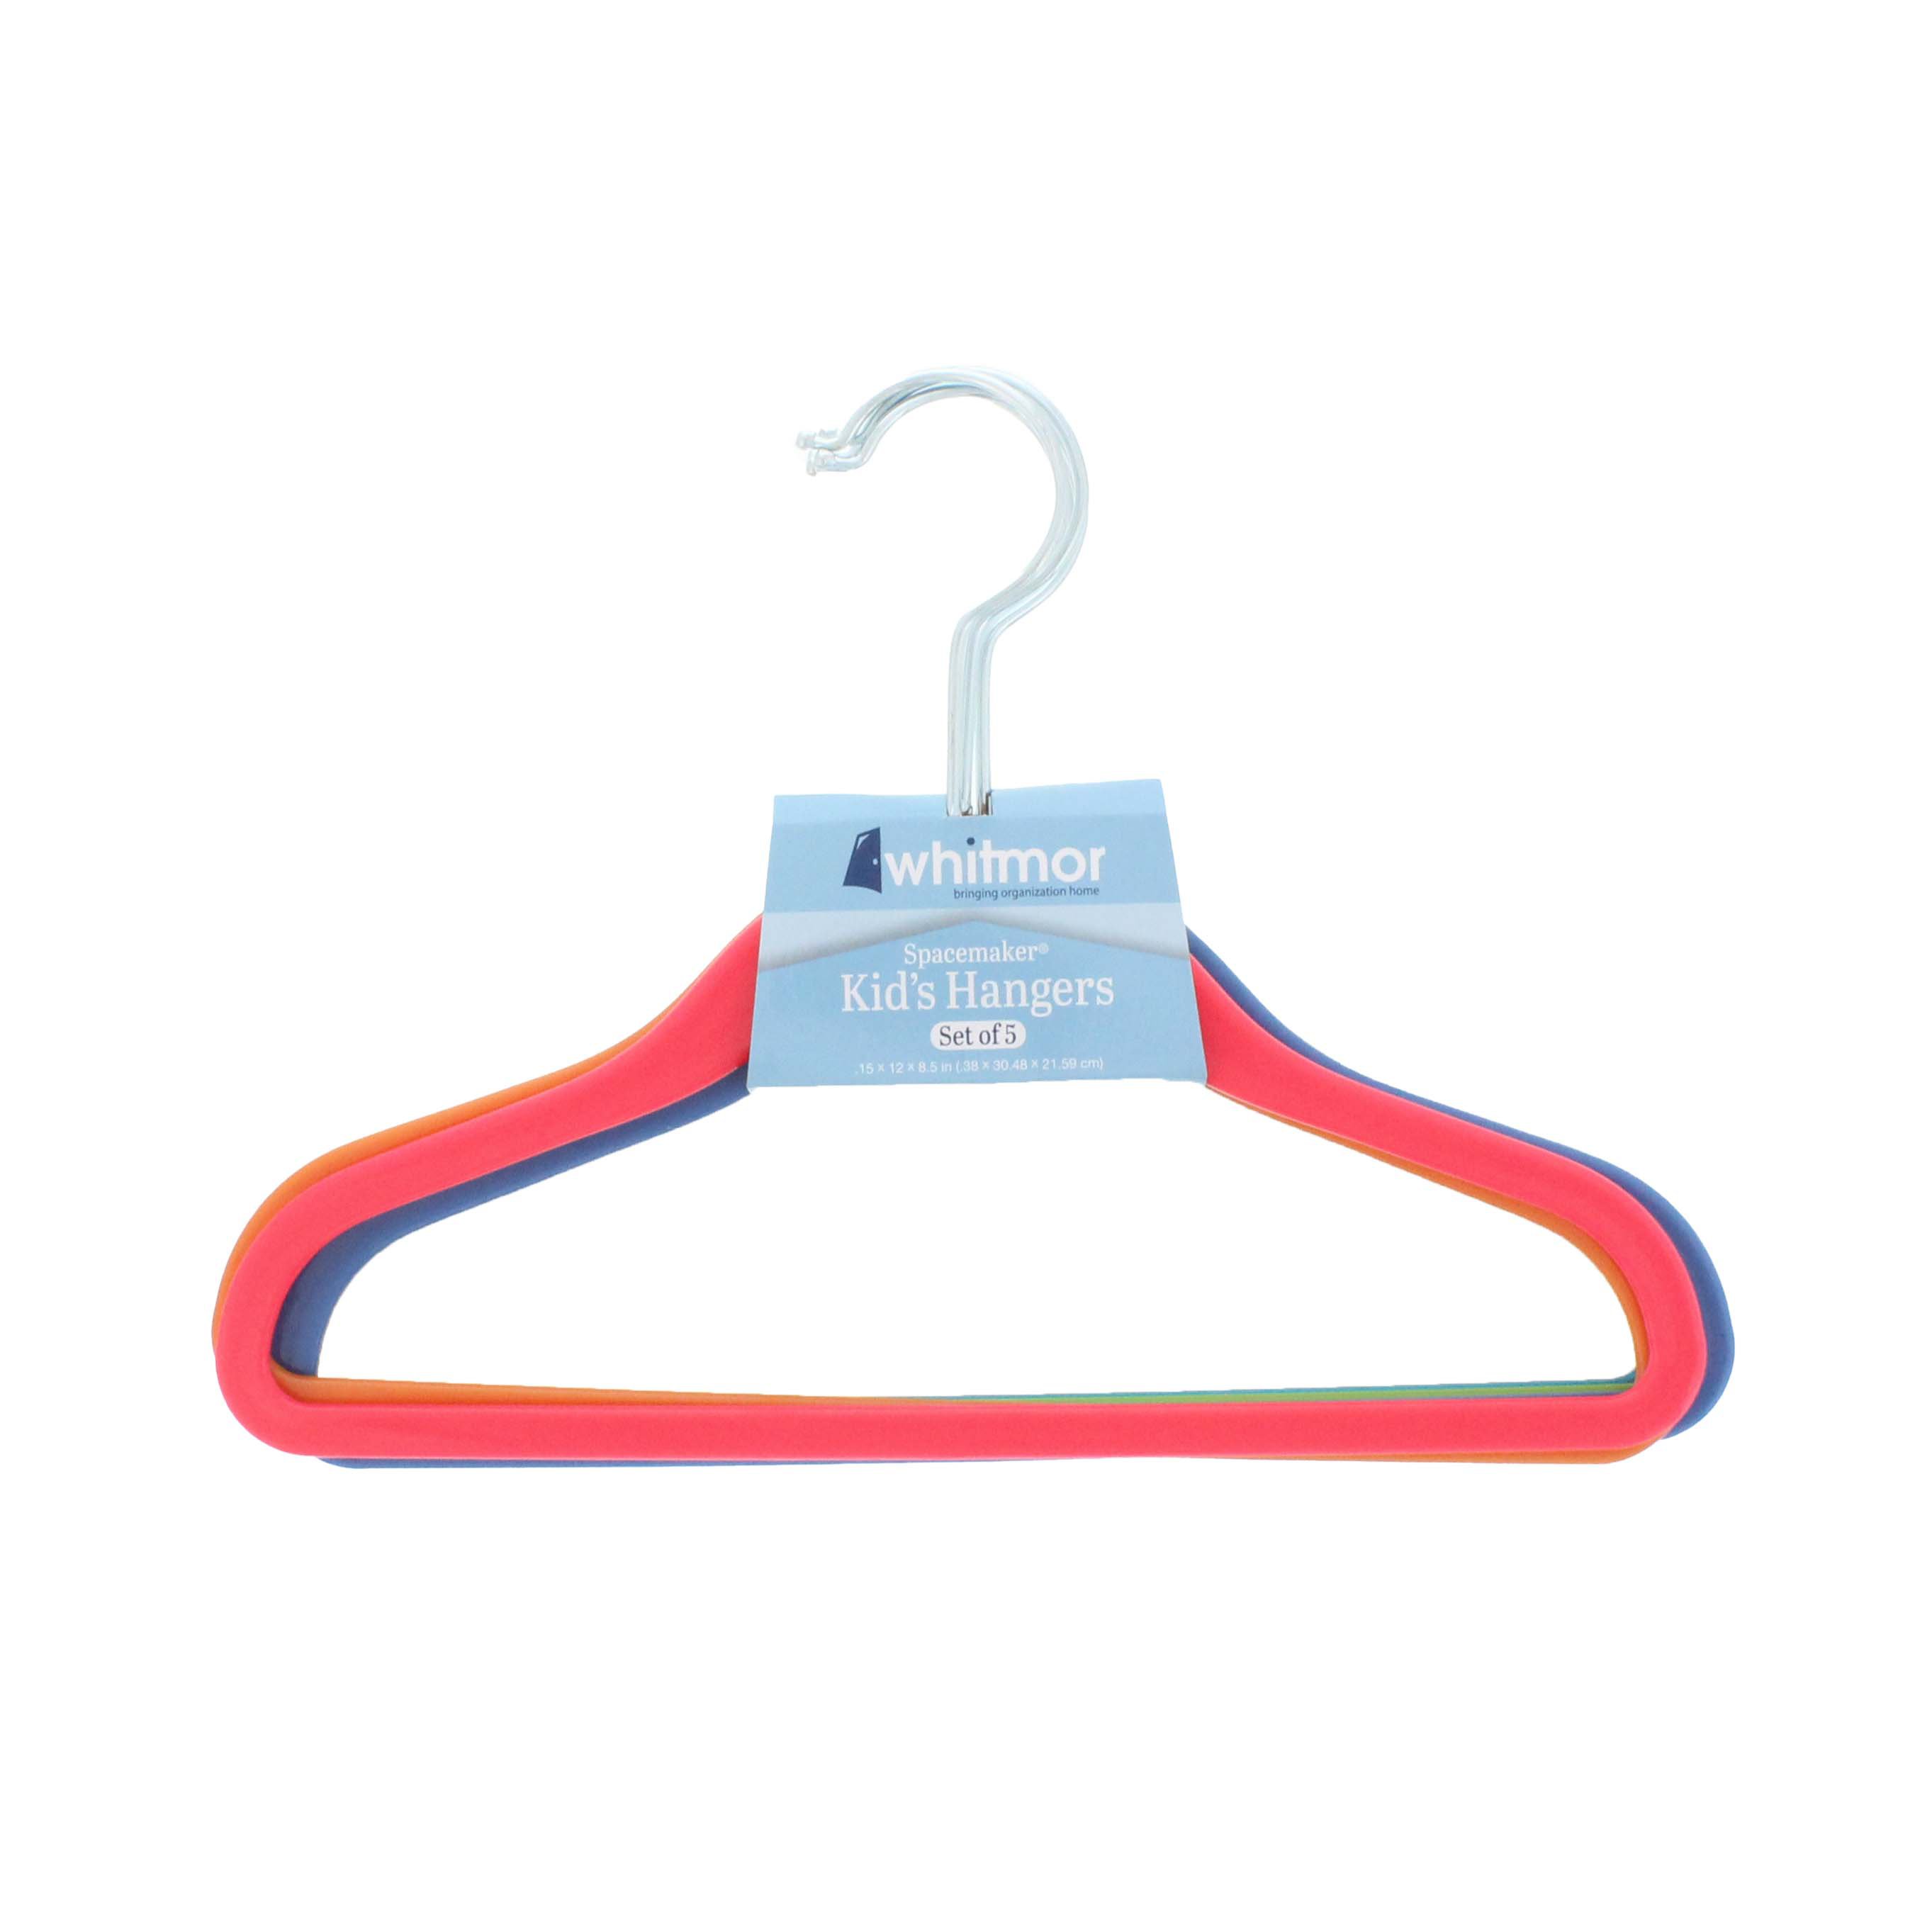 Whitmor Spacemaker Kid's Hangers - Shop Diaper Bags & Storage at H-E-B